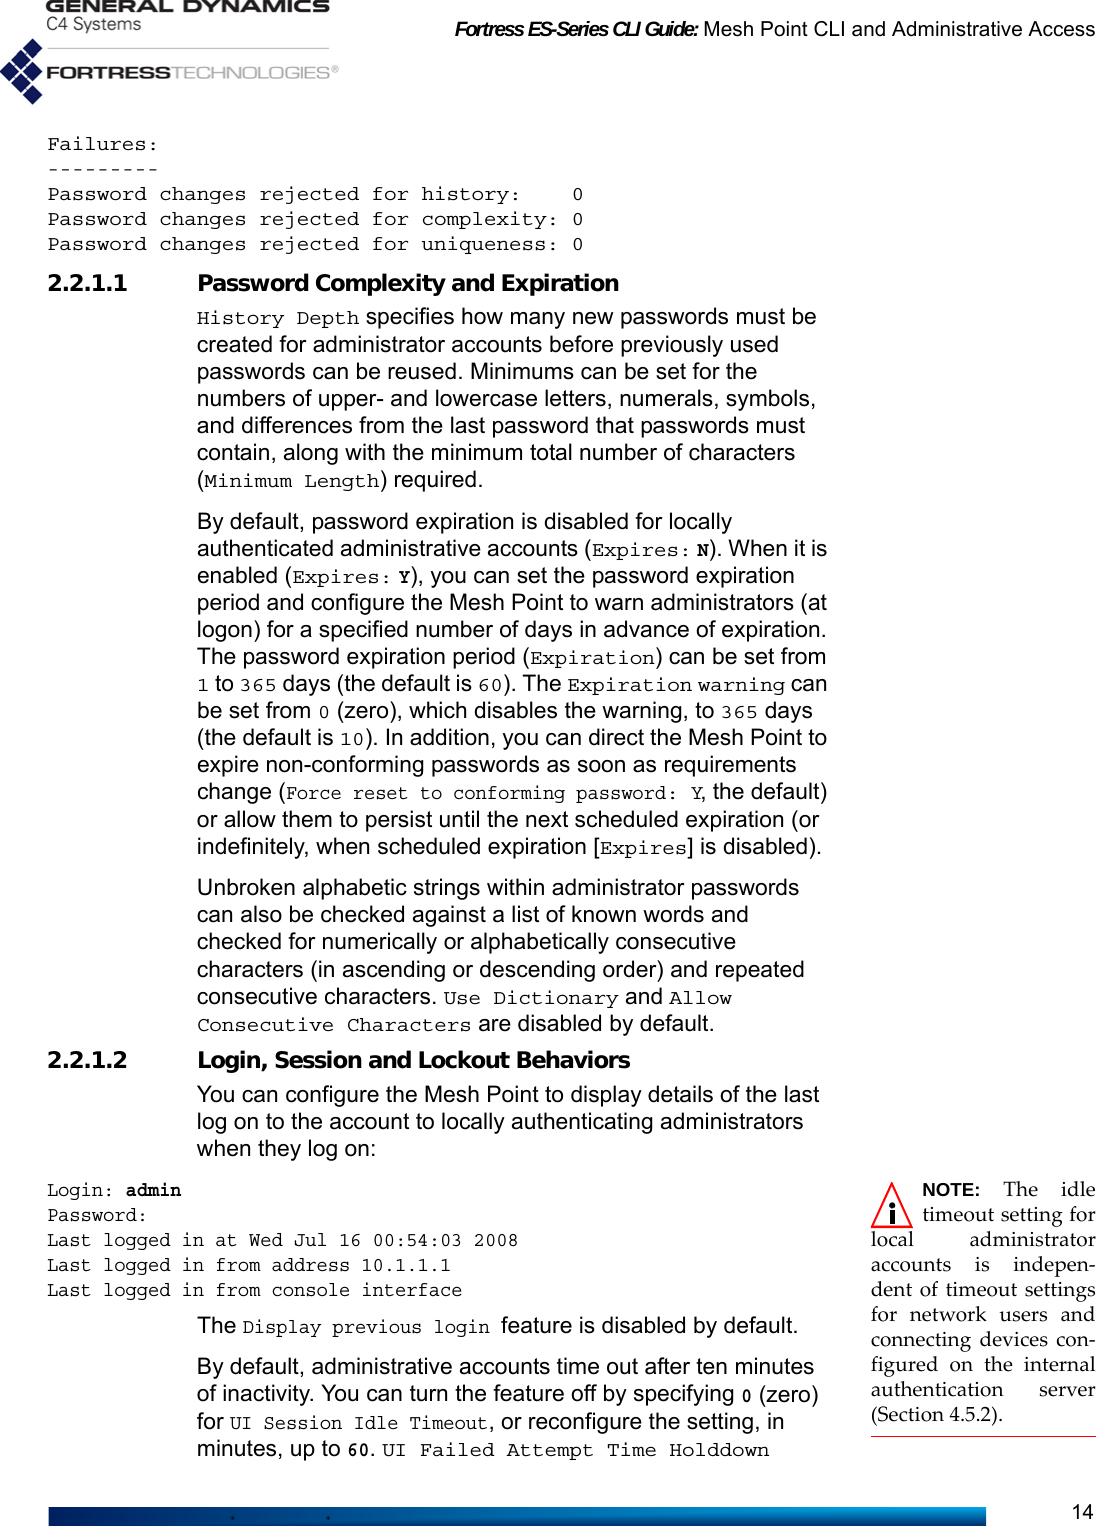 Fortress ES-Series CLI Guide: Mesh Point CLI and Administrative Access14Failures:---------Password changes rejected for history:    0Password changes rejected for complexity: 0Password changes rejected for uniqueness: 02.2.1.1 Password Complexity and ExpirationHistory Depth specifies how many new passwords must be created for administrator accounts before previously used passwords can be reused. Minimums can be set for the numbers of upper- and lowercase letters, numerals, symbols, and differences from the last password that passwords must contain, along with the minimum total number of characters (Minimum Length) required.By default, password expiration is disabled for locally authenticated administrative accounts (Expires: N). When it is enabled (Expires: Y), you can set the password expiration period and configure the Mesh Point to warn administrators (at logon) for a specified number of days in advance of expiration. The password expiration period (Expiration) can be set from 1 to 365 days (the default is 60). The Expiration warning can be set from 0 (zero), which disables the warning, to 365 days (the default is 10). In addition, you can direct the Mesh Point to expire non-conforming passwords as soon as requirements change (Force reset to conforming password: Y, the default) or allow them to persist until the next scheduled expiration (or indefinitely, when scheduled expiration [Expires] is disabled).Unbroken alphabetic strings within administrator passwords can also be checked against a list of known words and checked for numerically or alphabetically consecutive characters (in ascending or descending order) and repeated consecutive characters. Use Dictionary and Allow Consecutive Characters are disabled by default.2.2.1.2 Login, Session and Lockout BehaviorsYou can configure the Mesh Point to display details of the last log on to the account to locally authenticating administrators when they log on: NOTE: The idletimeout setting forlocal administratoraccounts is indepen-dent of timeout settingsfor network users andconnecting devices con-figured on the internalauthentication server(Section 4.5.2).Login: adminPassword:Last logged in at Wed Jul 16 00:54:03 2008Last logged in from address 10.1.1.1Last logged in from console interfaceThe Display previous login feature is disabled by default.By default, administrative accounts time out after ten minutes of inactivity. You can turn the feature off by specifying 0 (zero) for UI Session Idle Timeout, or reconfigure the setting, in minutes, up to 60. UI Failed Attempt Time Holddown 